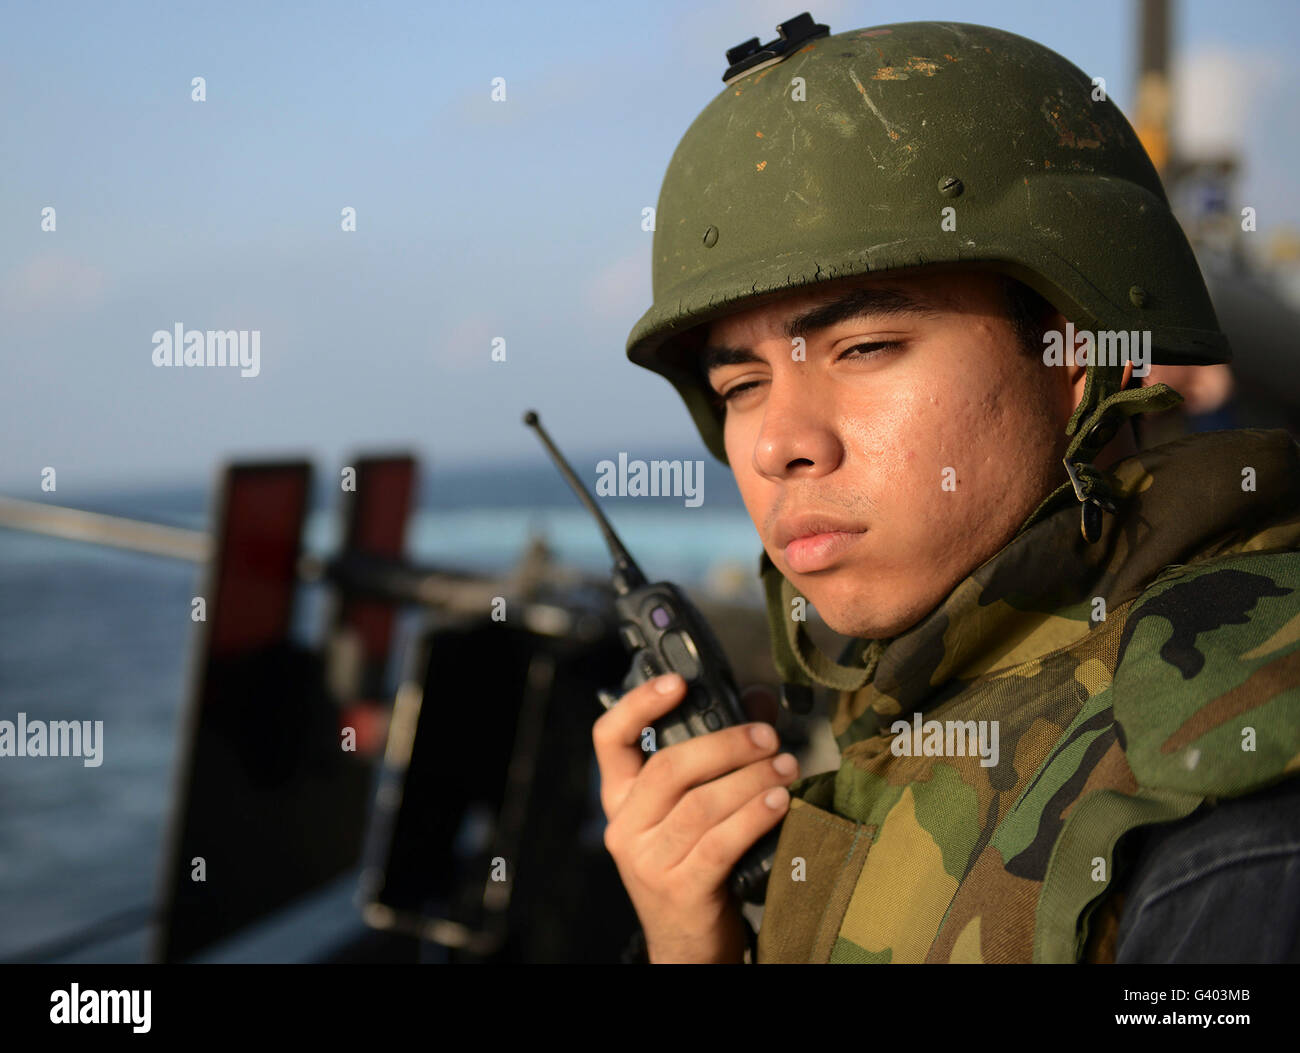 U.S. Navy Machinist's Mate radios the officer of the deck. Stock Photo